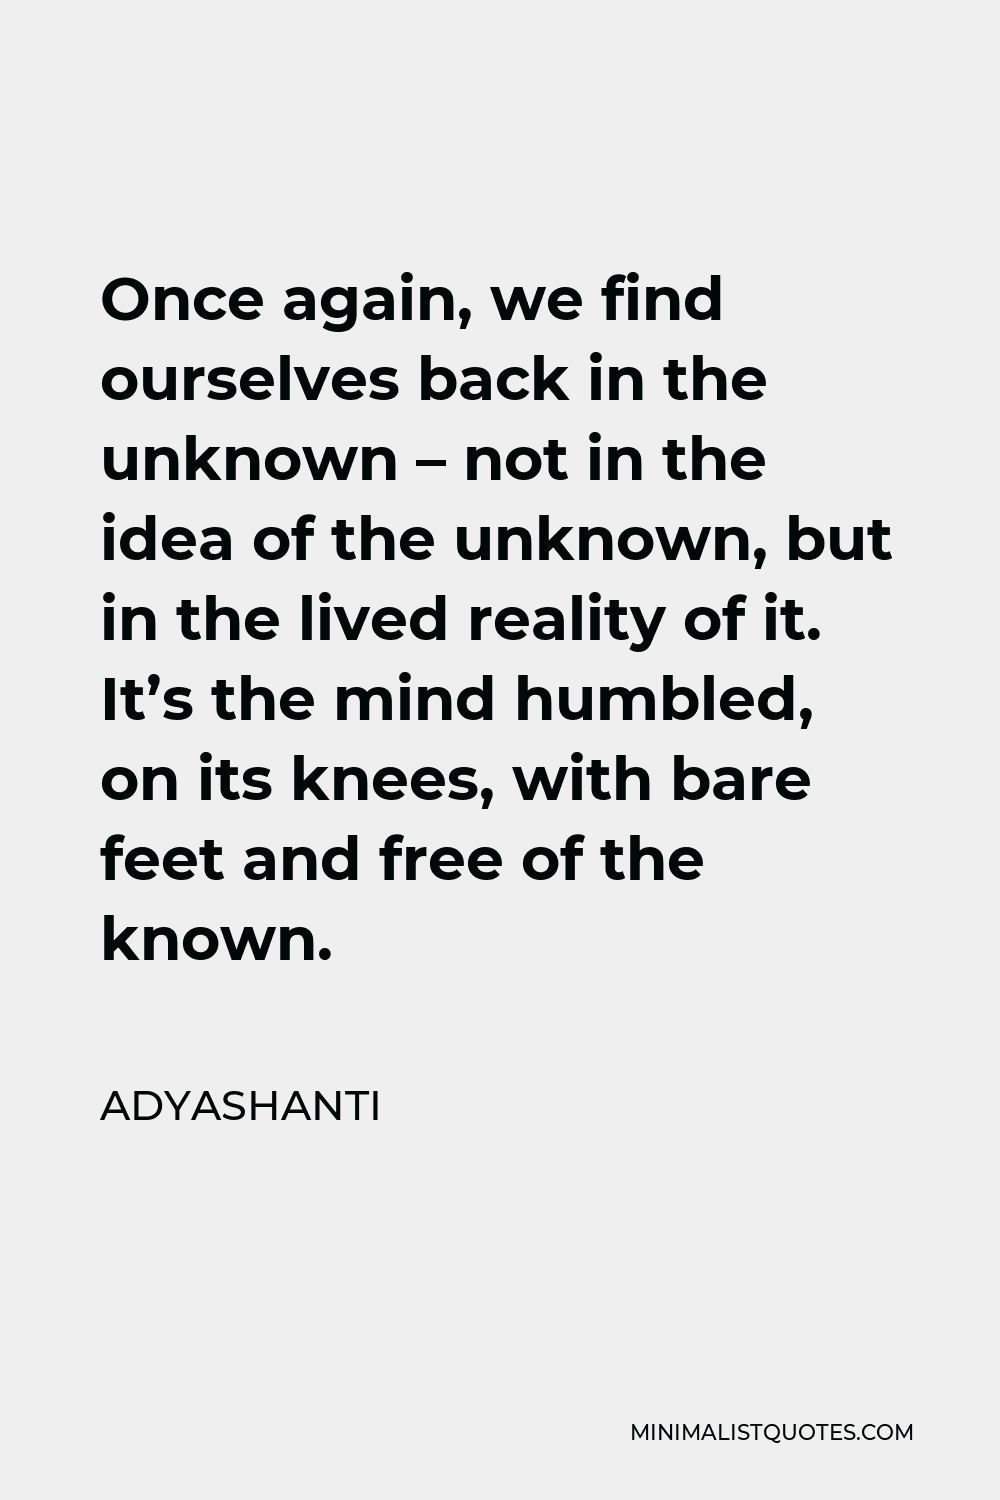 Adyashanti Quote - Once again, we find ourselves back in the unknown – not in the idea of the unknown, but in the lived reality of it. It’s the mind humbled, on its knees, with bare feet and free of the known.